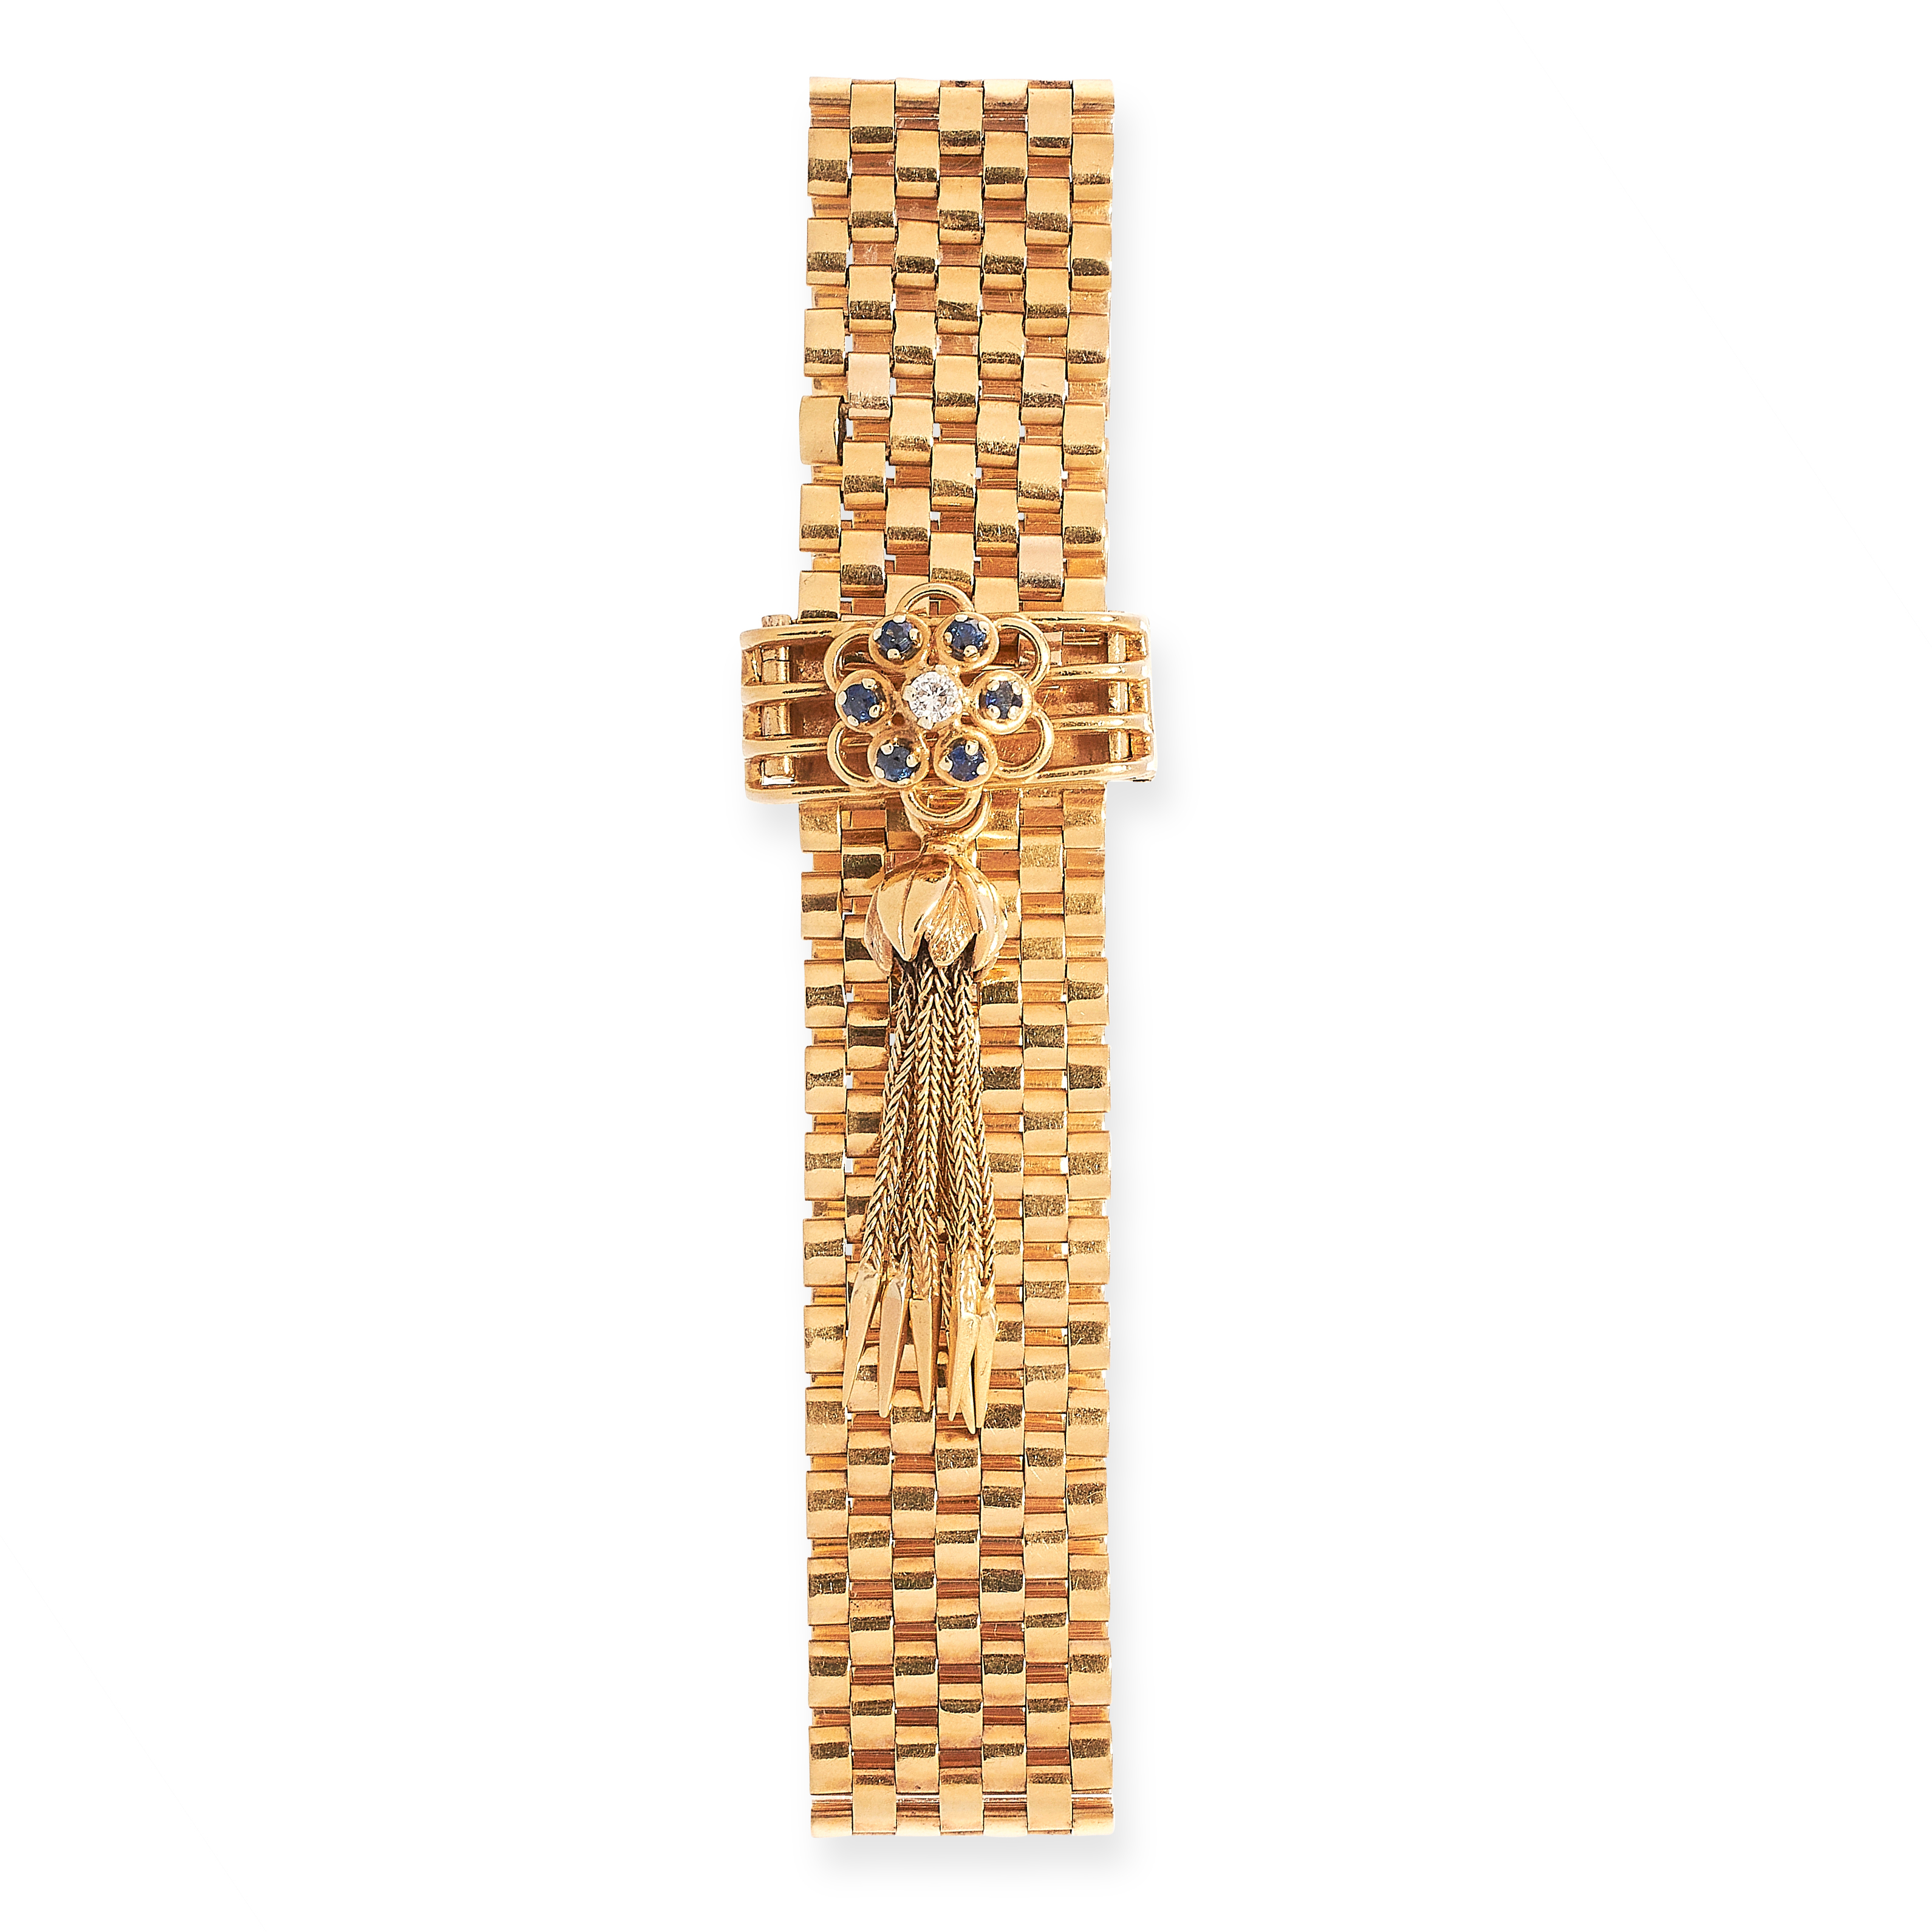 SAPPHIRE AND DIAMOND FANCY LINK BRACELET in yellow gold, of strap design, formed of alternating